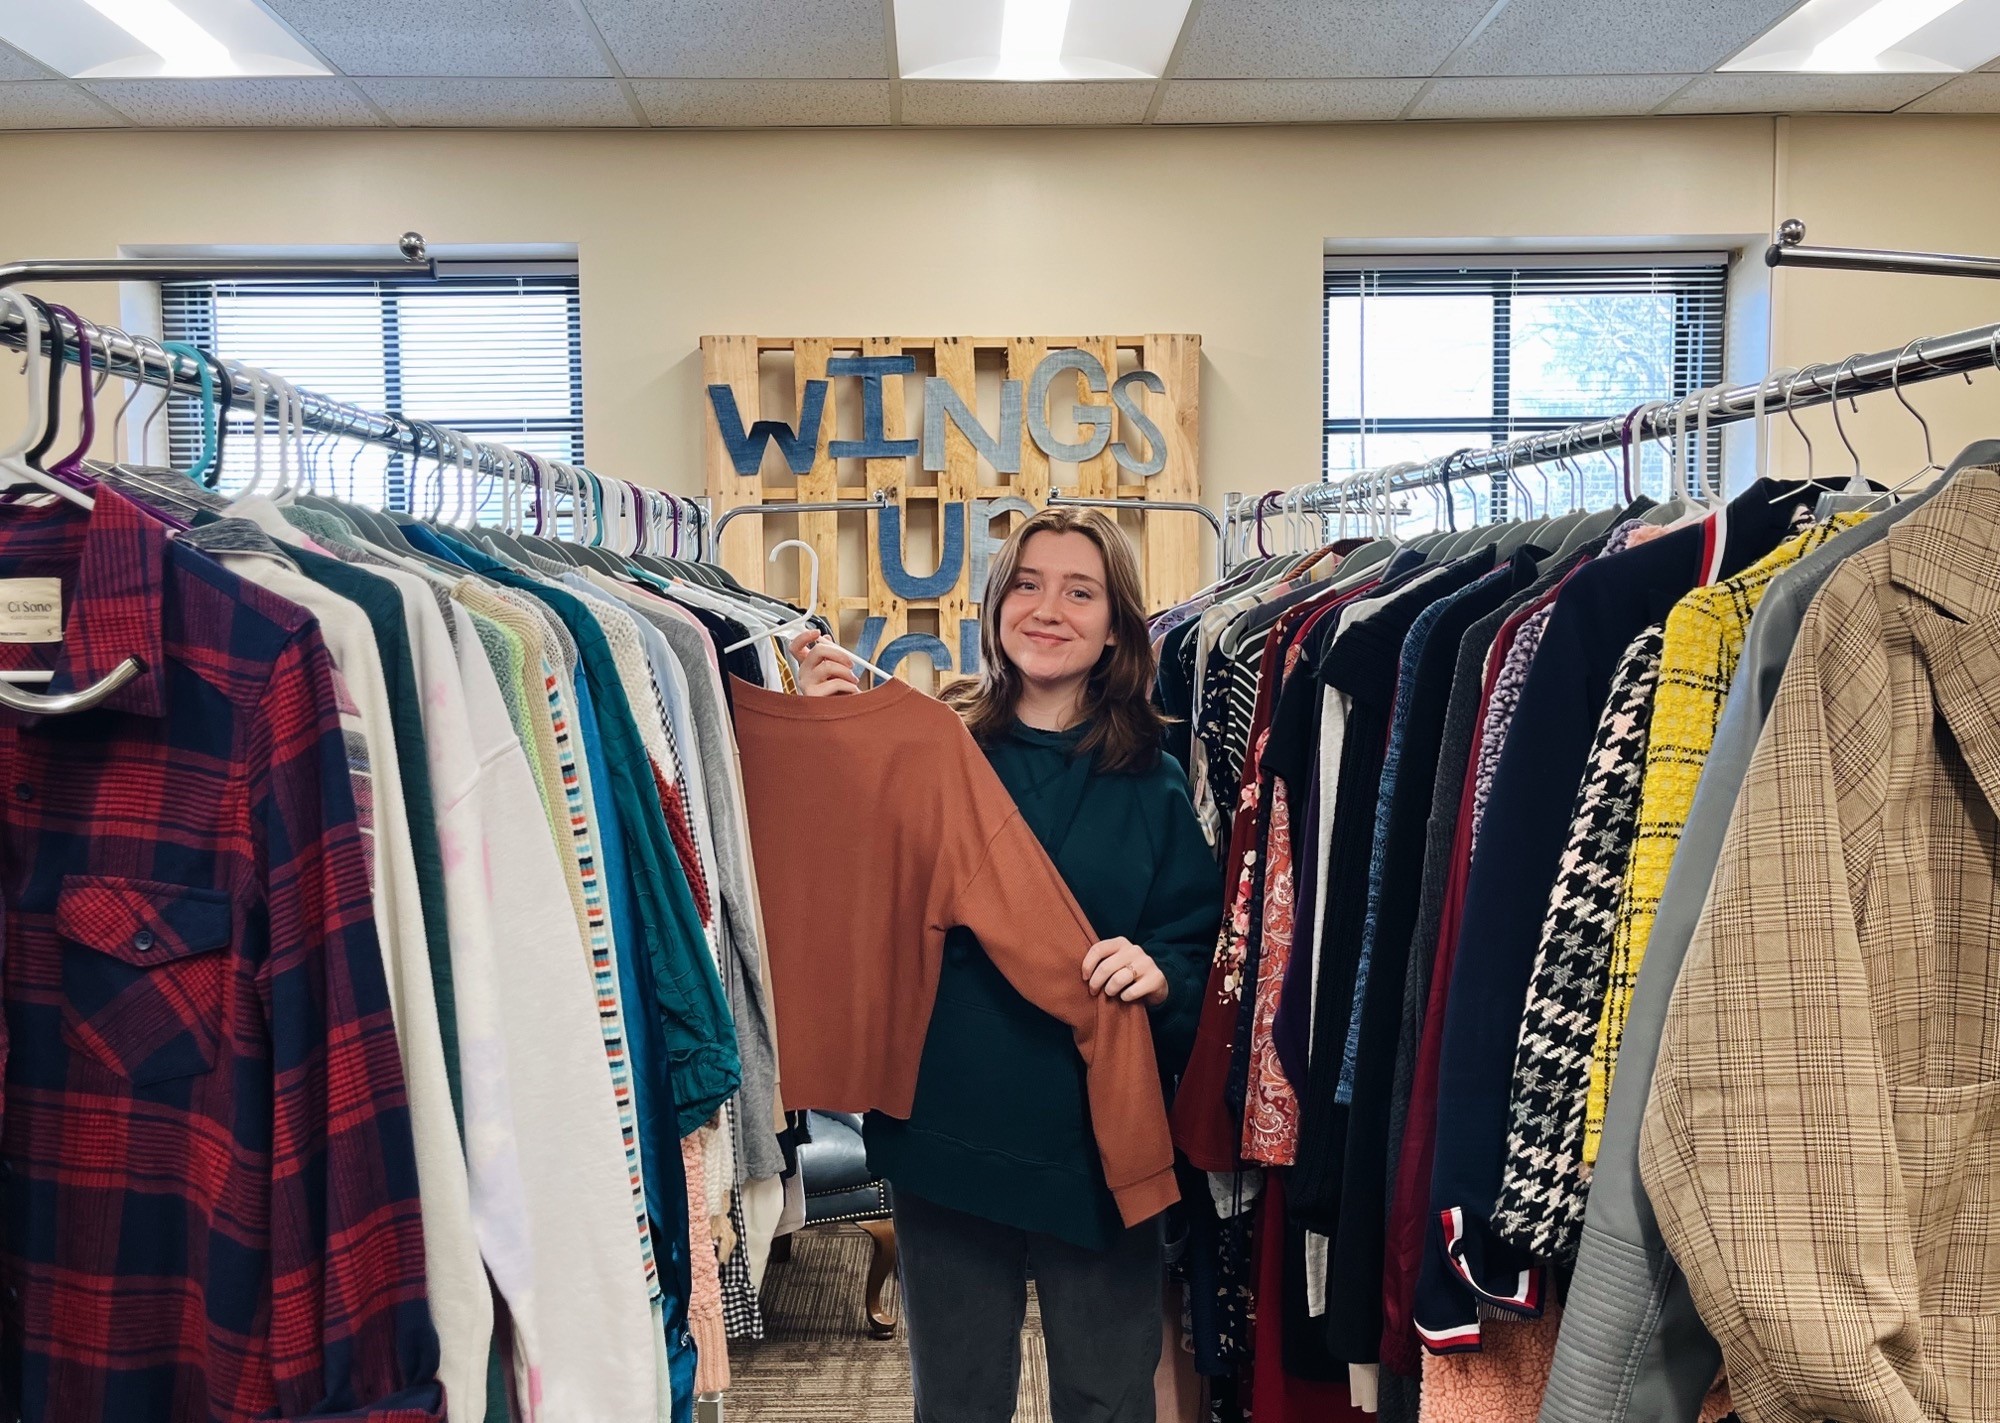 Erika Phillips, a senior design students major at Tech, is pictured at the Wings Up-Cycled store.